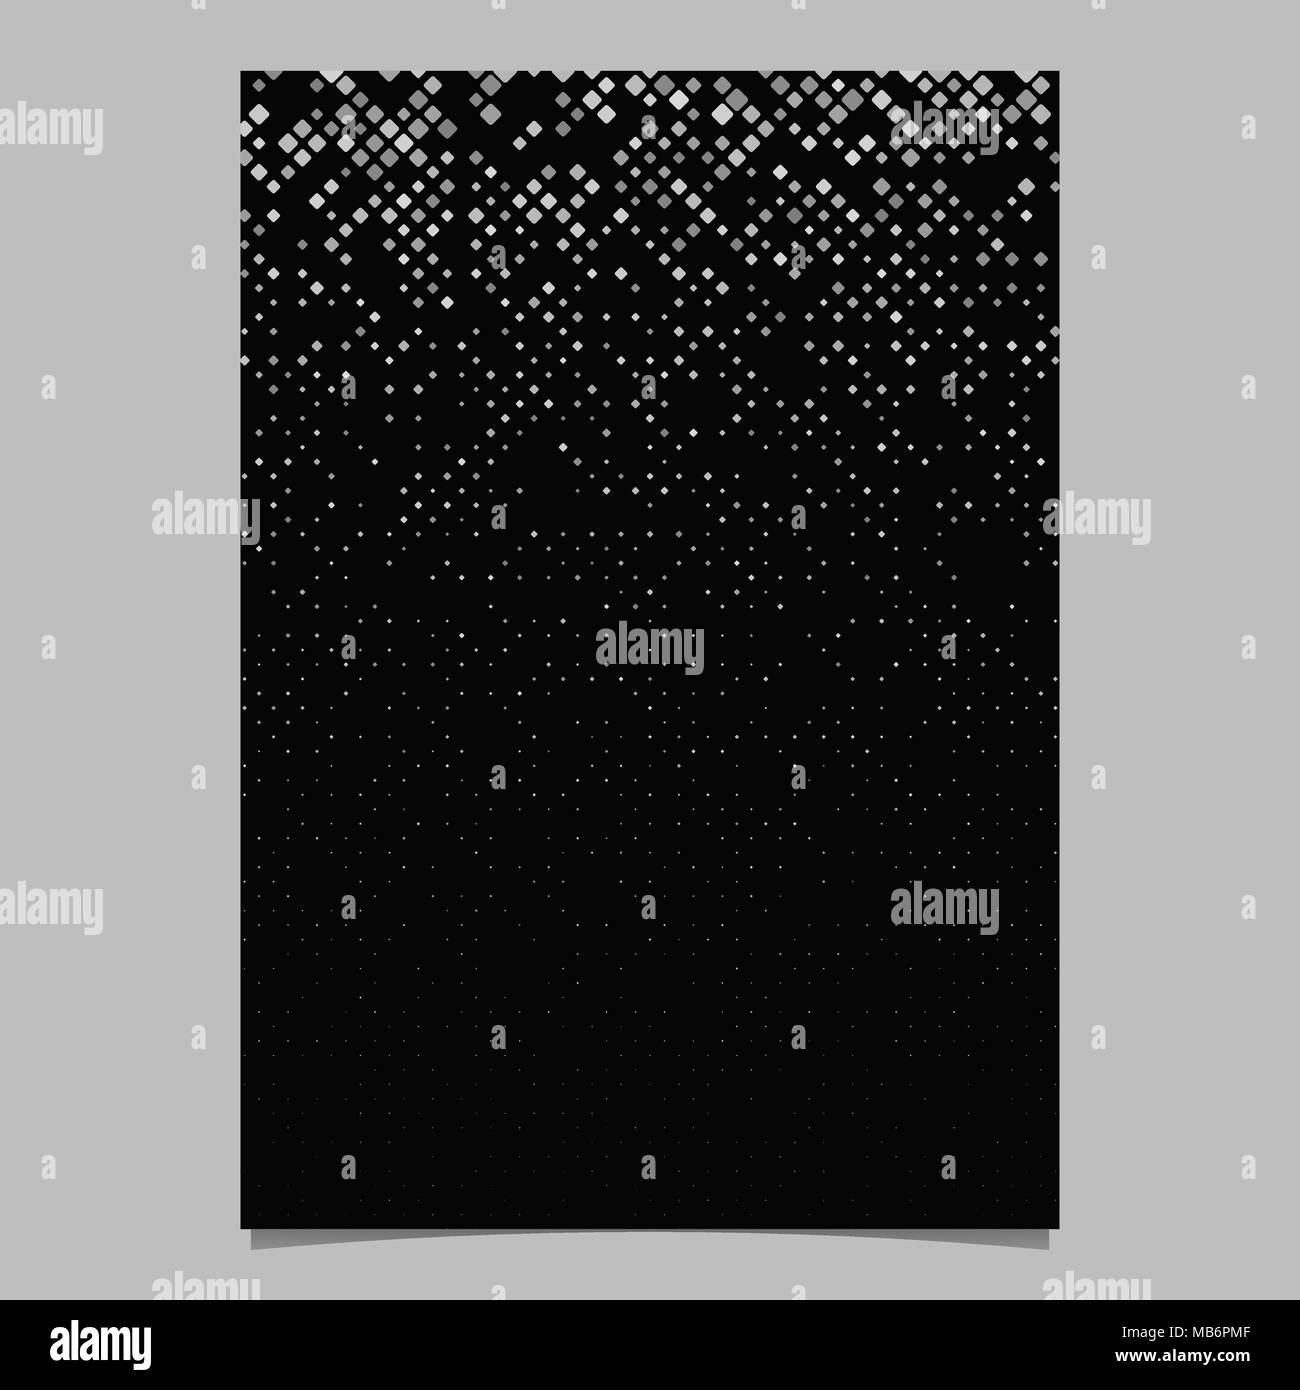 Abstract square pattern flyer template Stock Vector